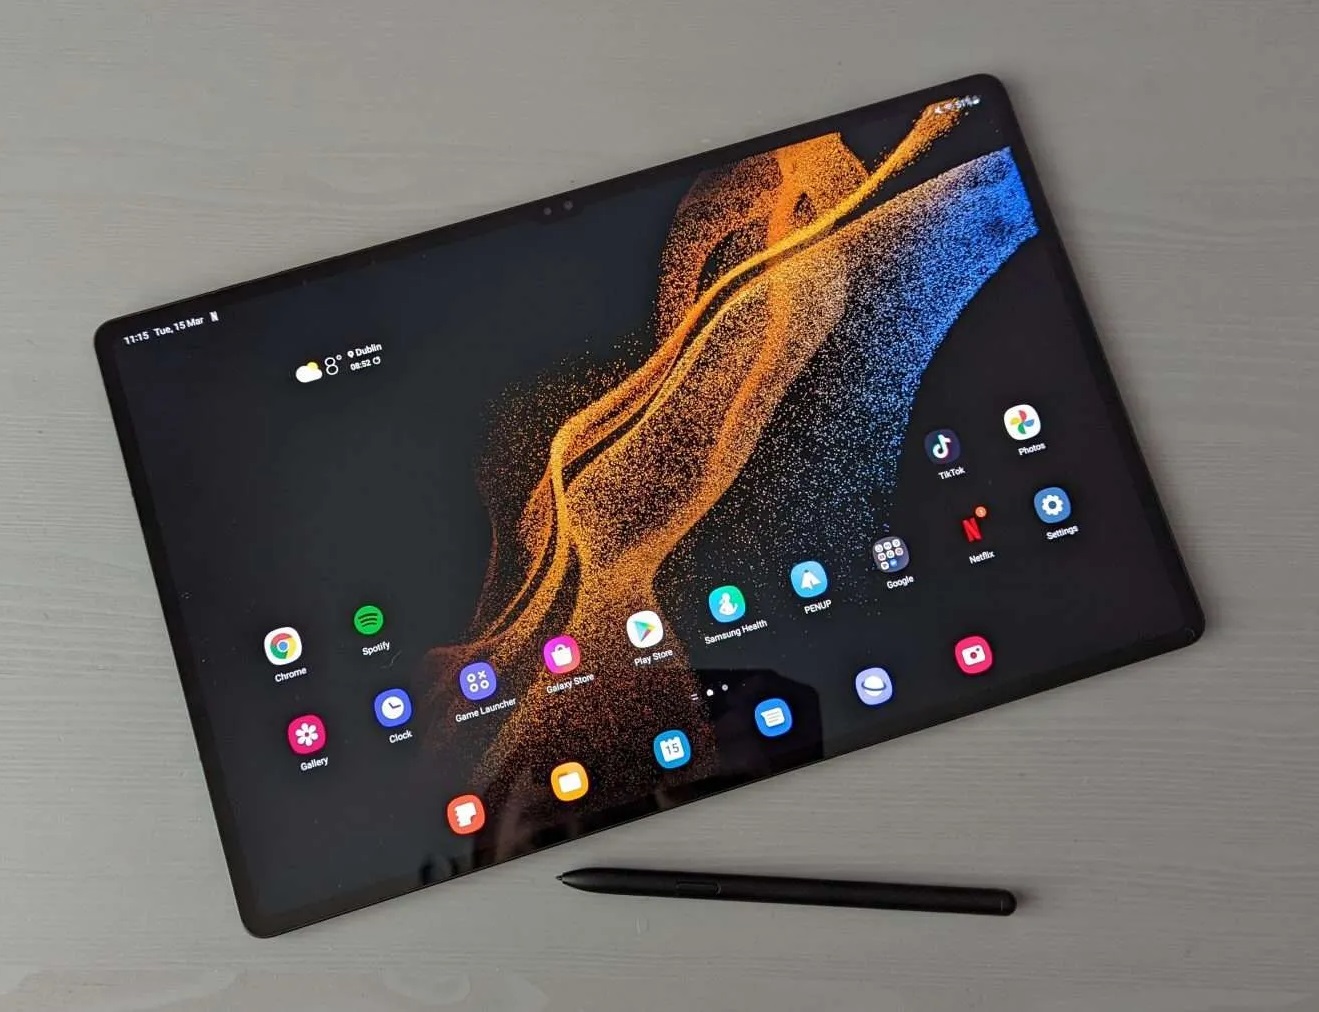 One update S9 Tab stable 6.0 receives UI Galaxy